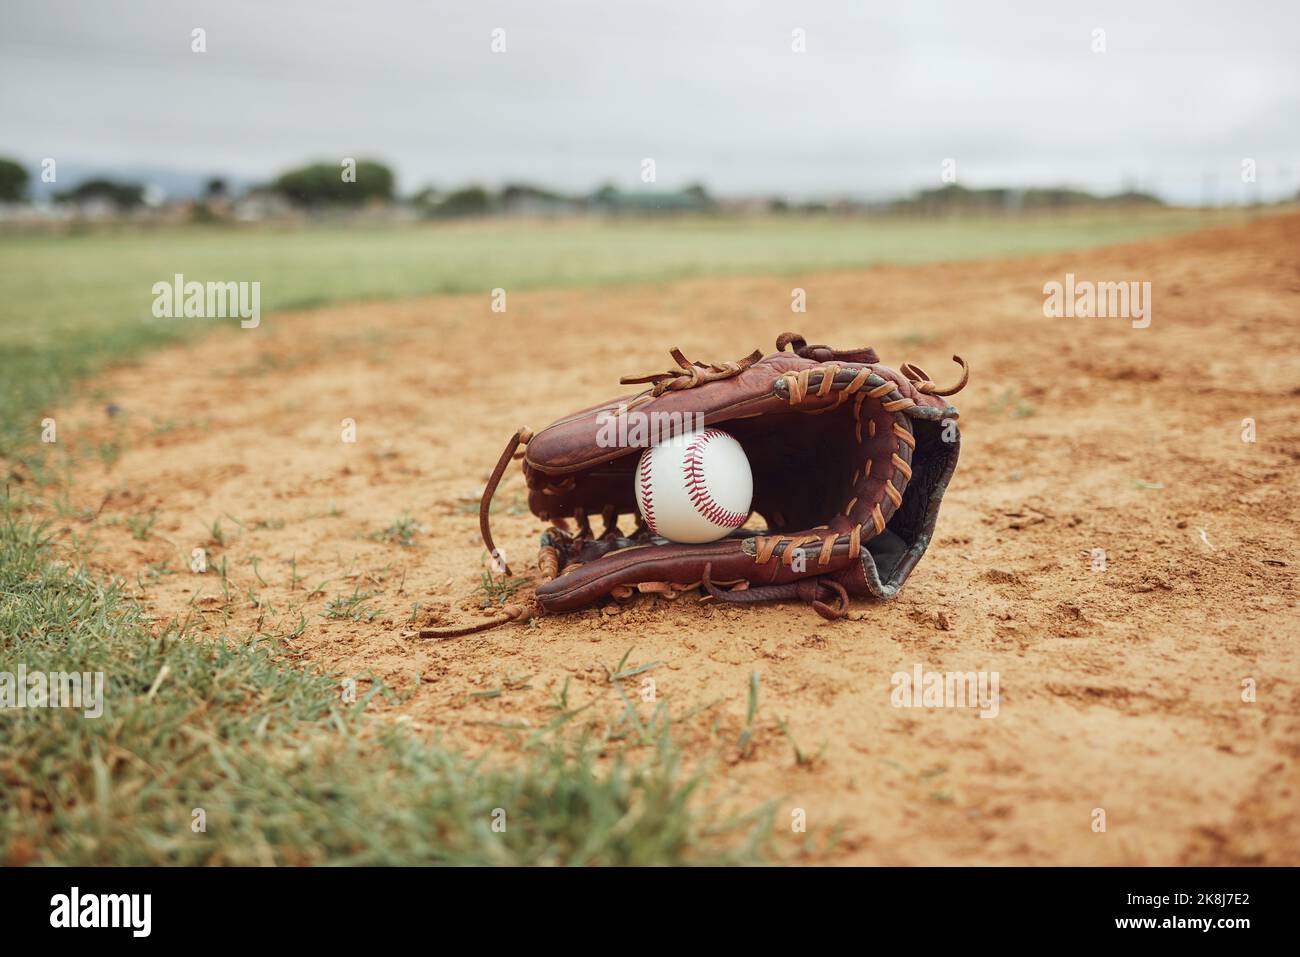 Sports, baseball gloves and field ball on dirt floor after game, competition or practice match for fitness, exercise or health. Softball pitch Stock Photo